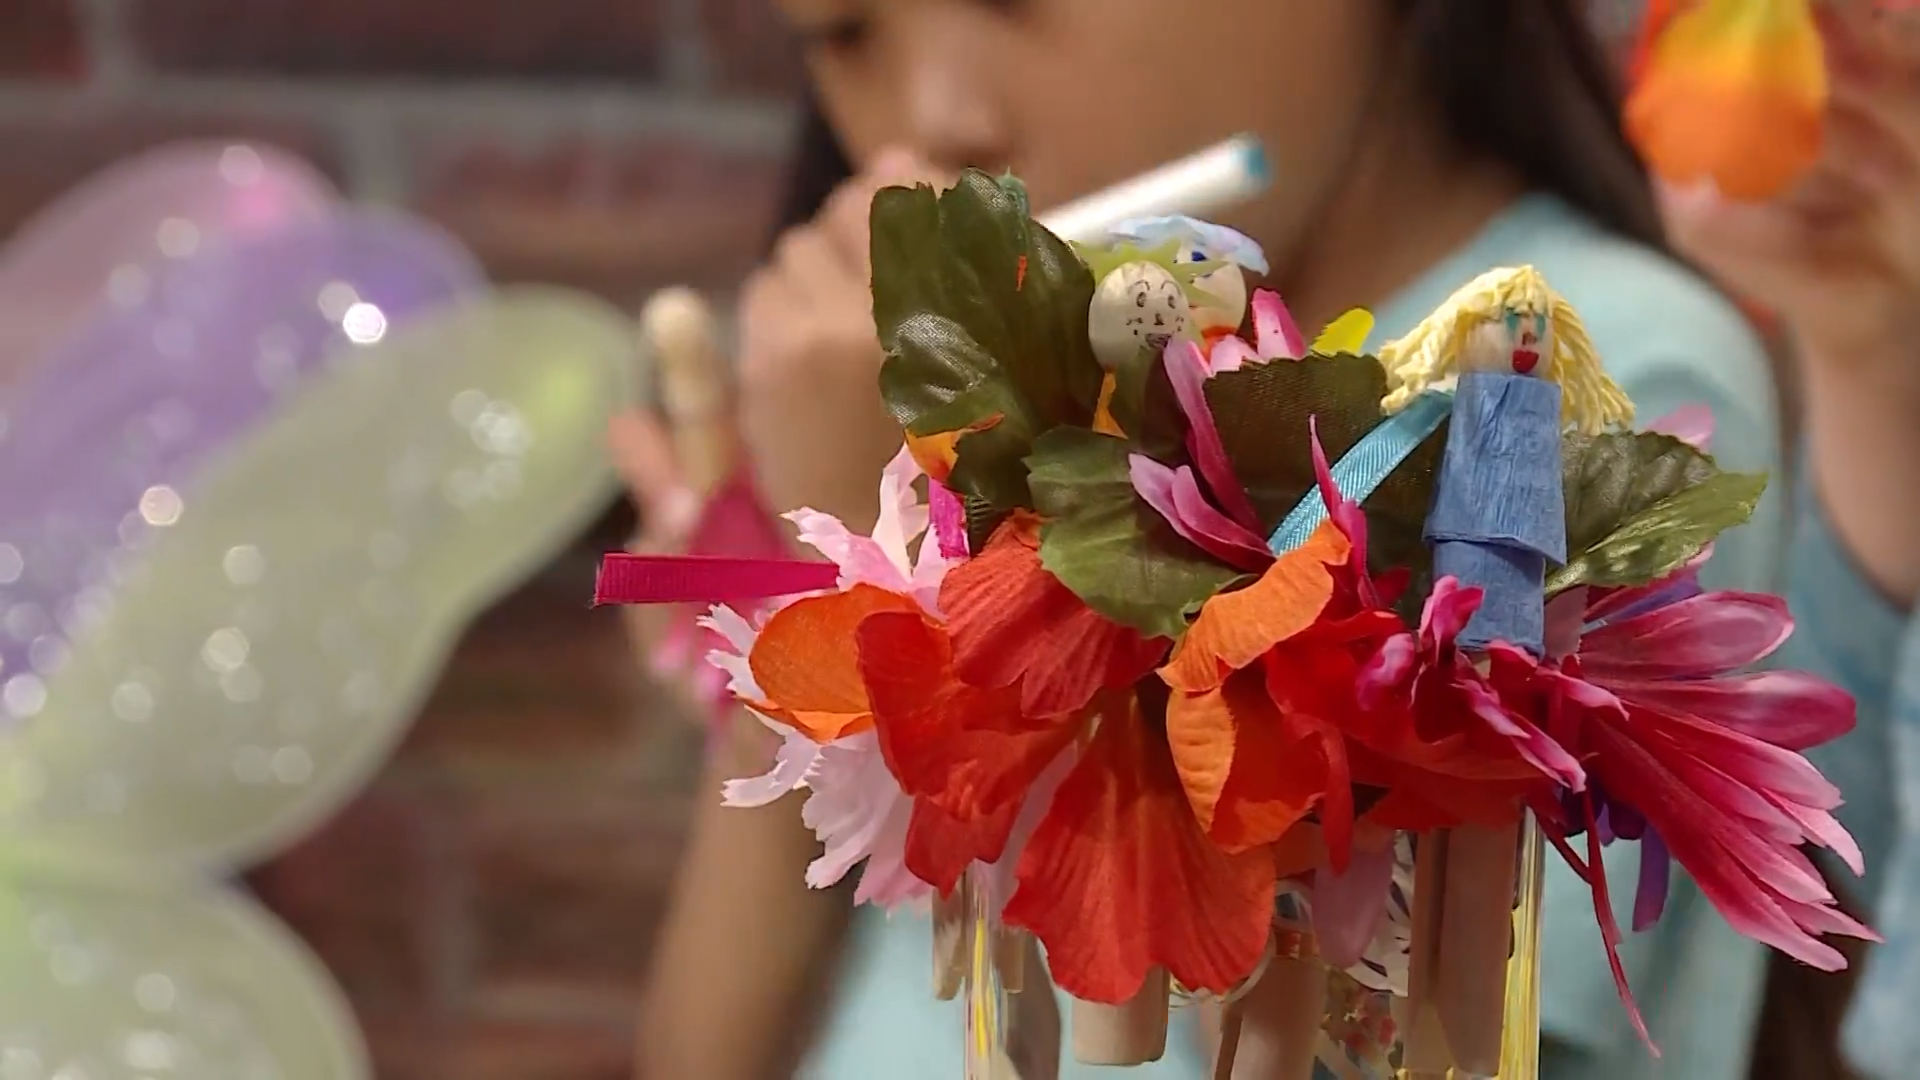 How To Make Flower Fairies - adding decorations